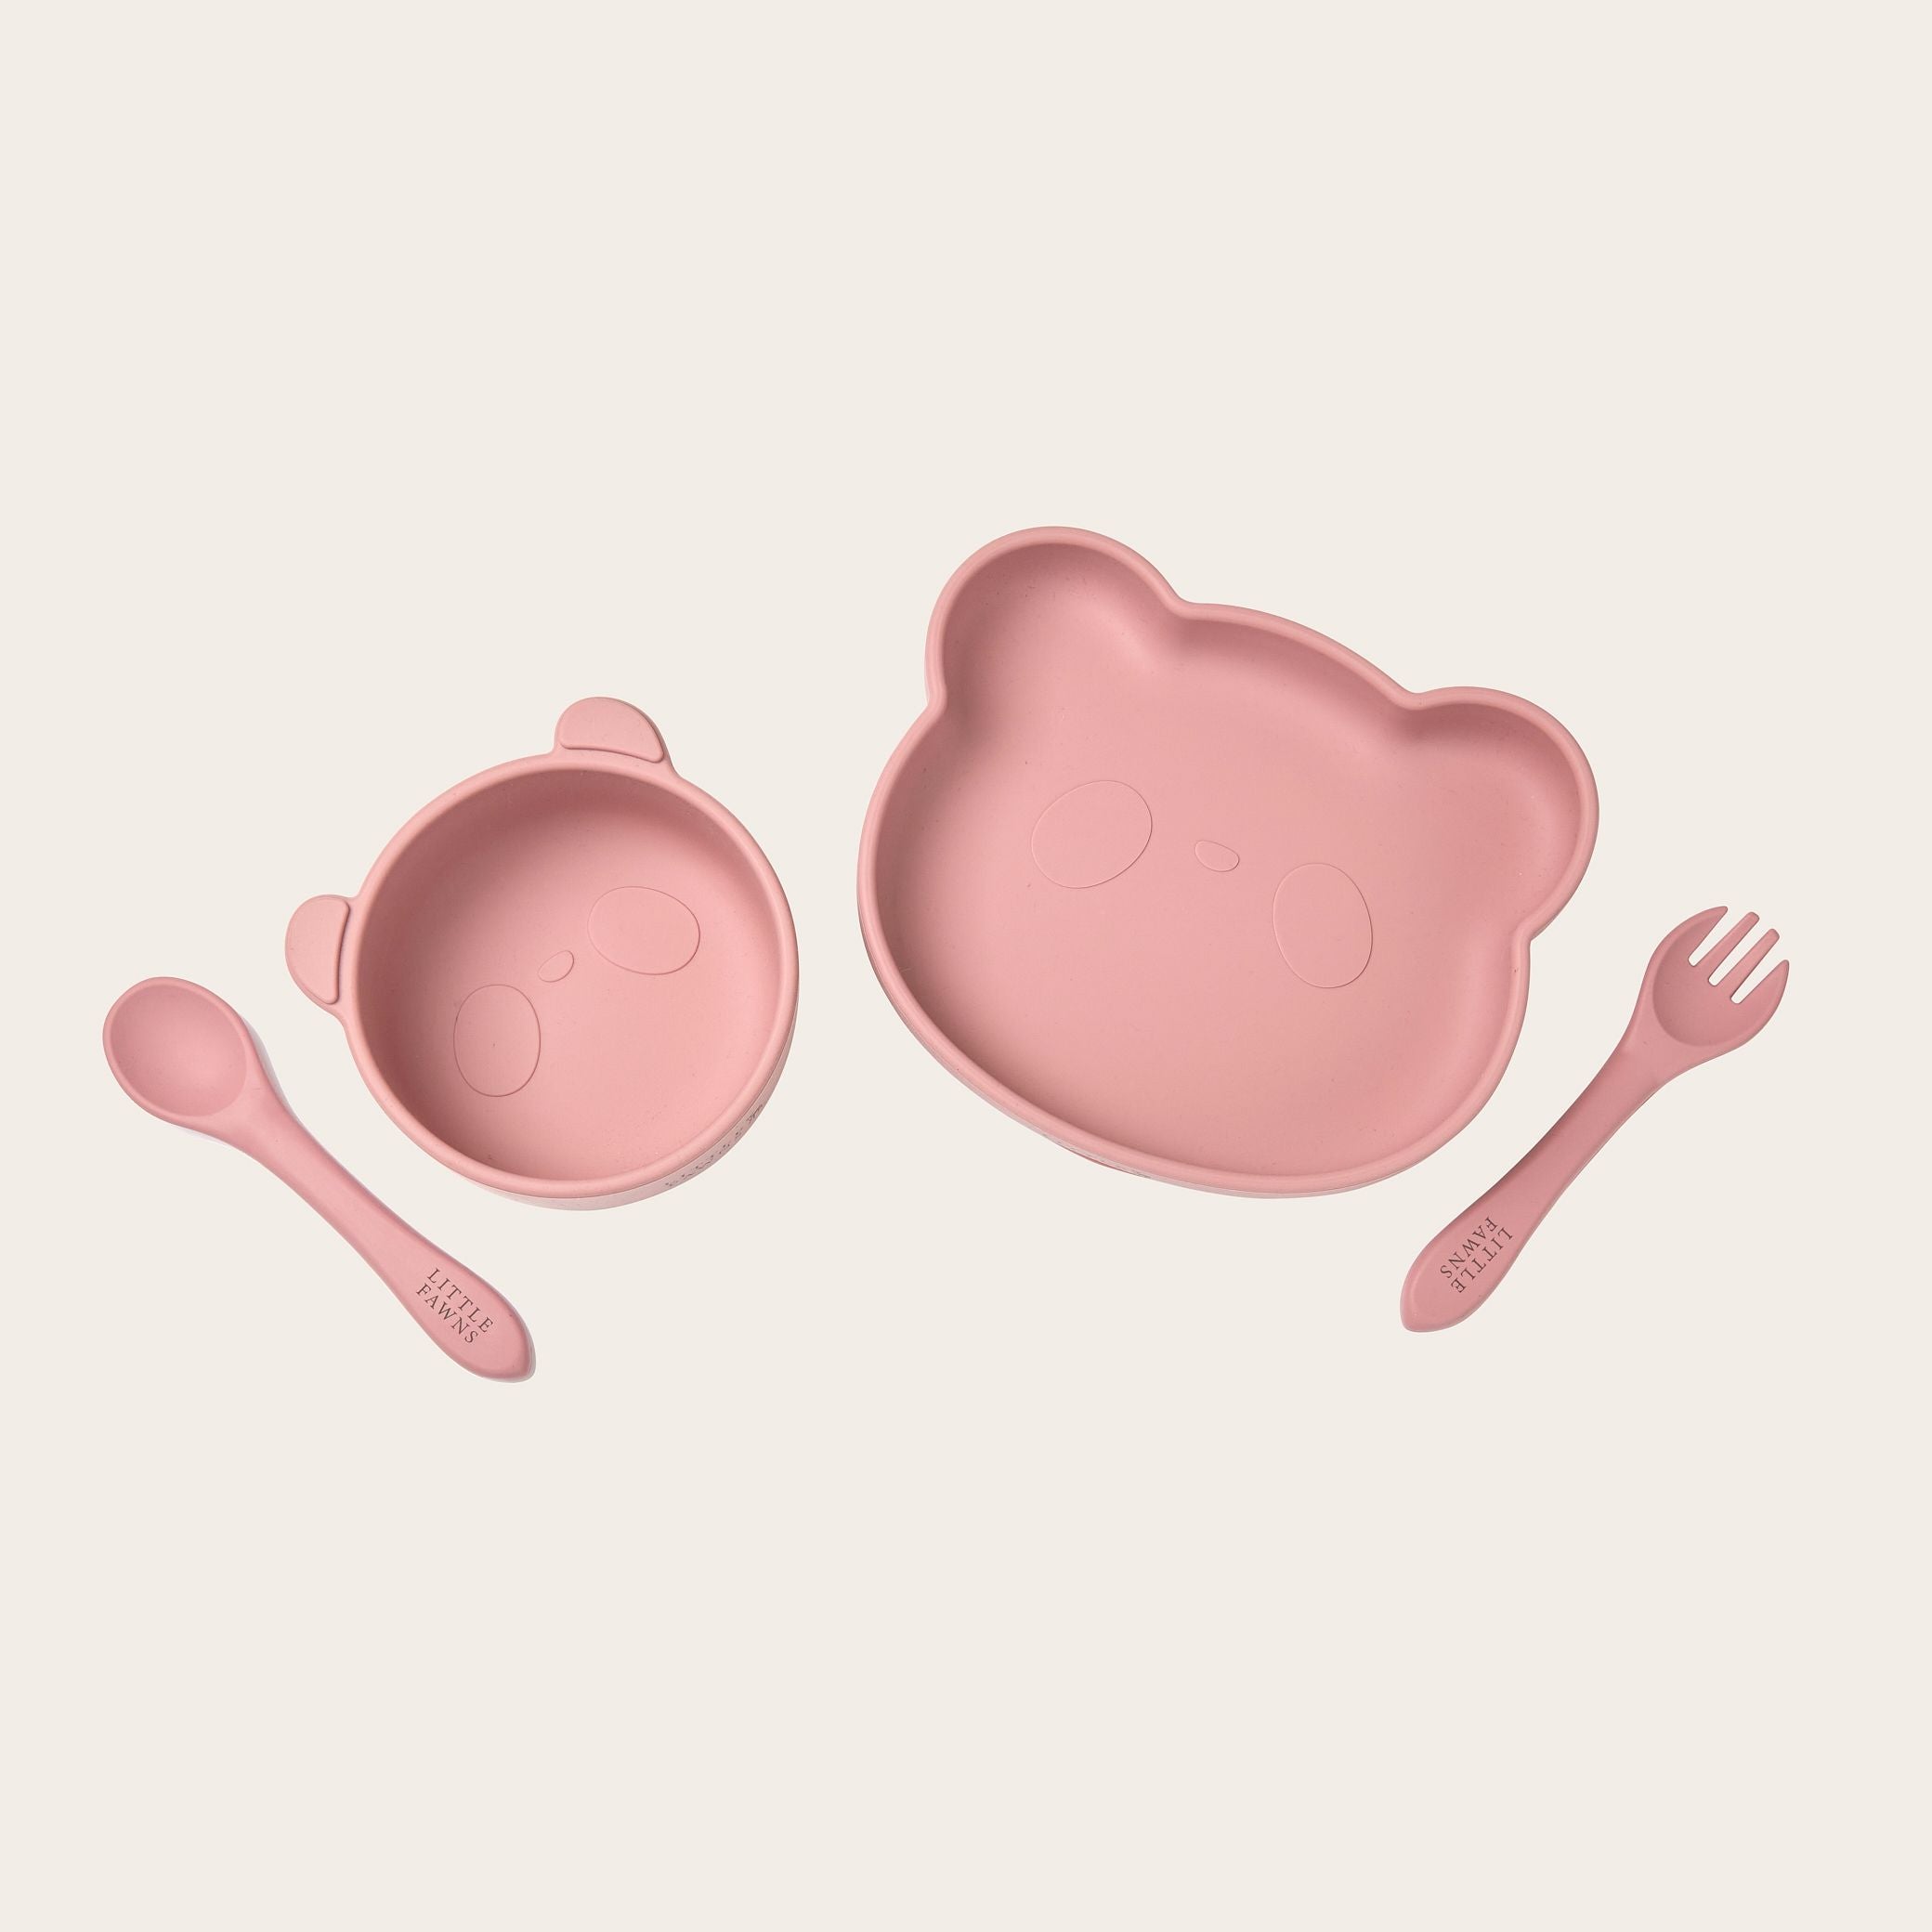 Silicone Suction Panda Bowl & Plate Set in Dusty Pink